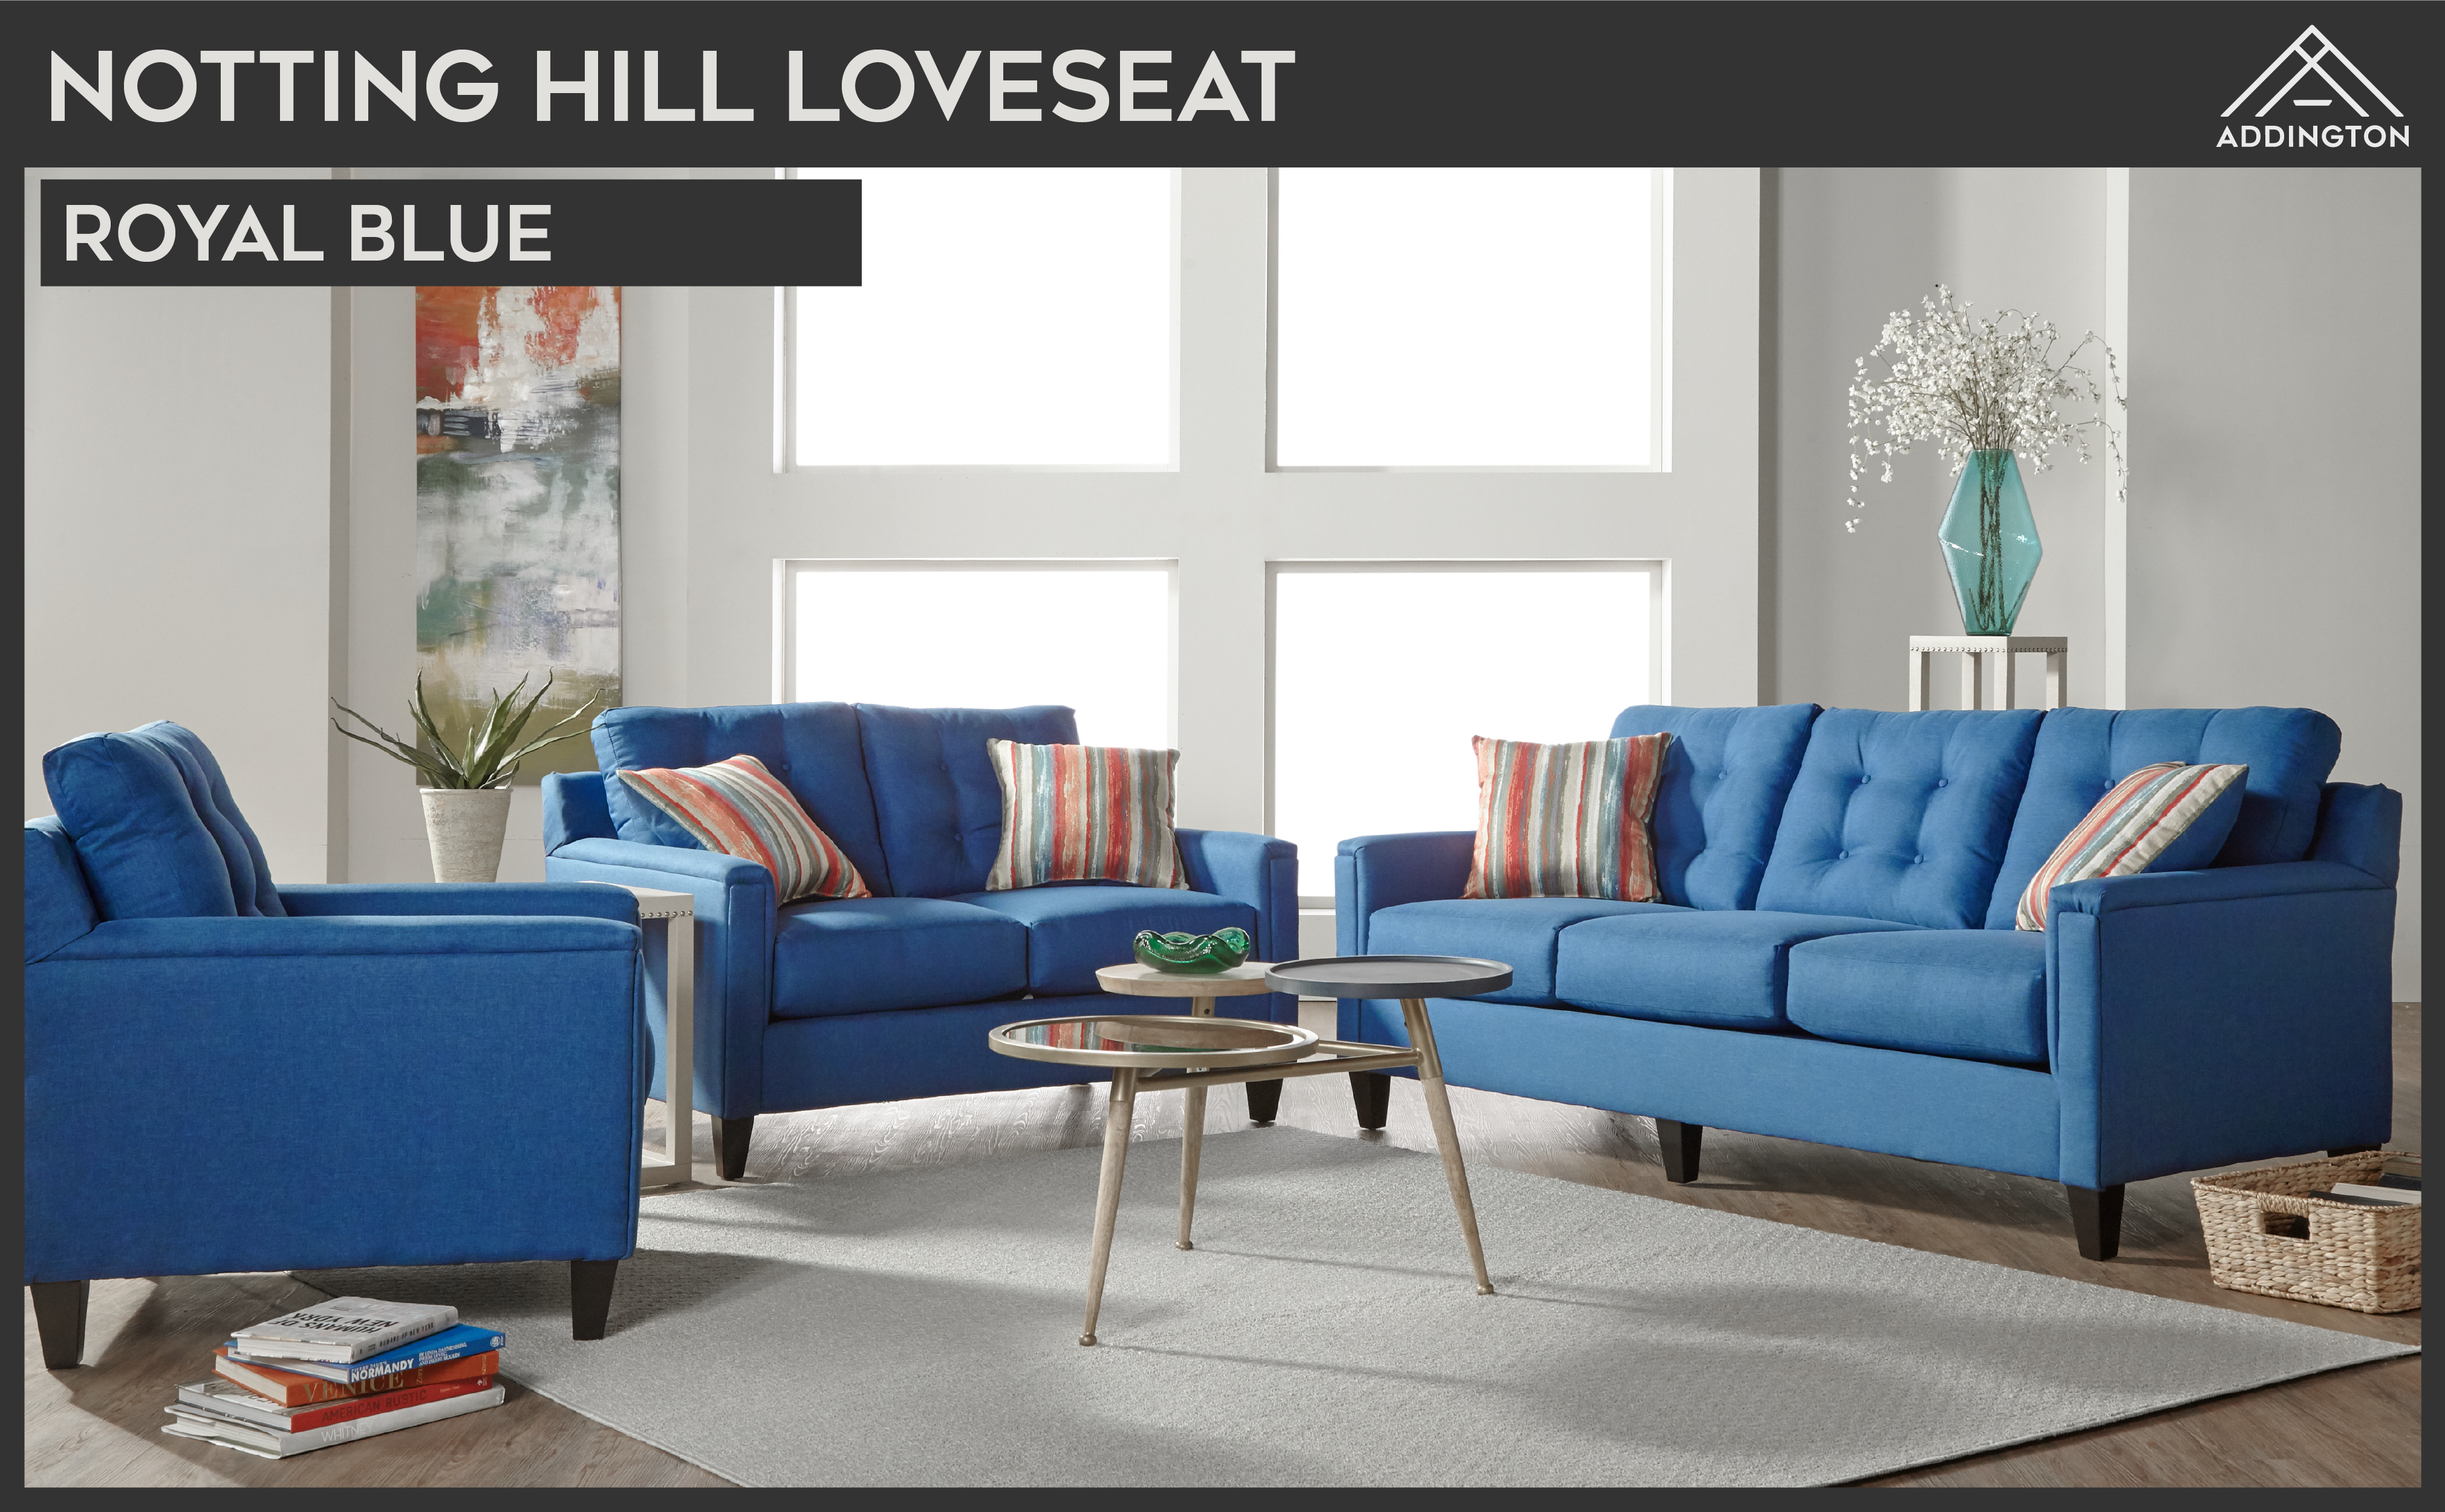 notting hill loveseat blue life style.png__PID:5e8732d1-96cb-49df-bbfb-54c9d74d8360